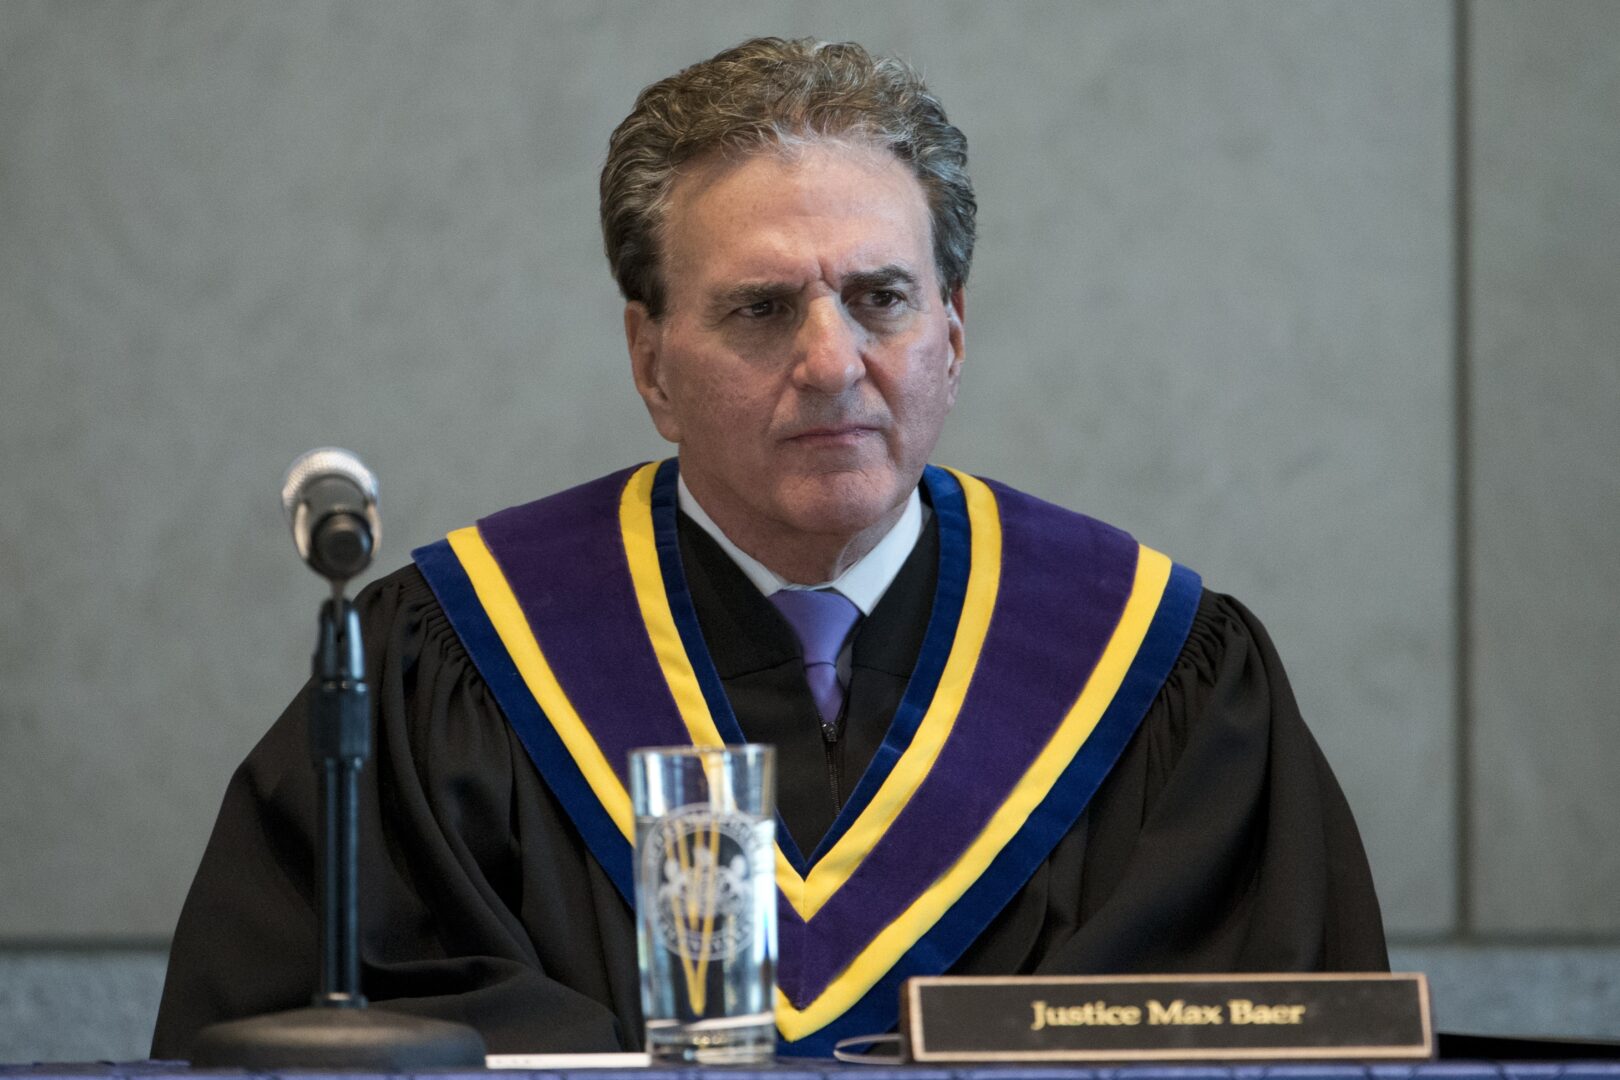 In this Tuesday, Jan. 5, 2016 photo Pennsylvania Supreme Court Justice Max Baer attends a ceremony at the National Constitution Center in Philadelphia.